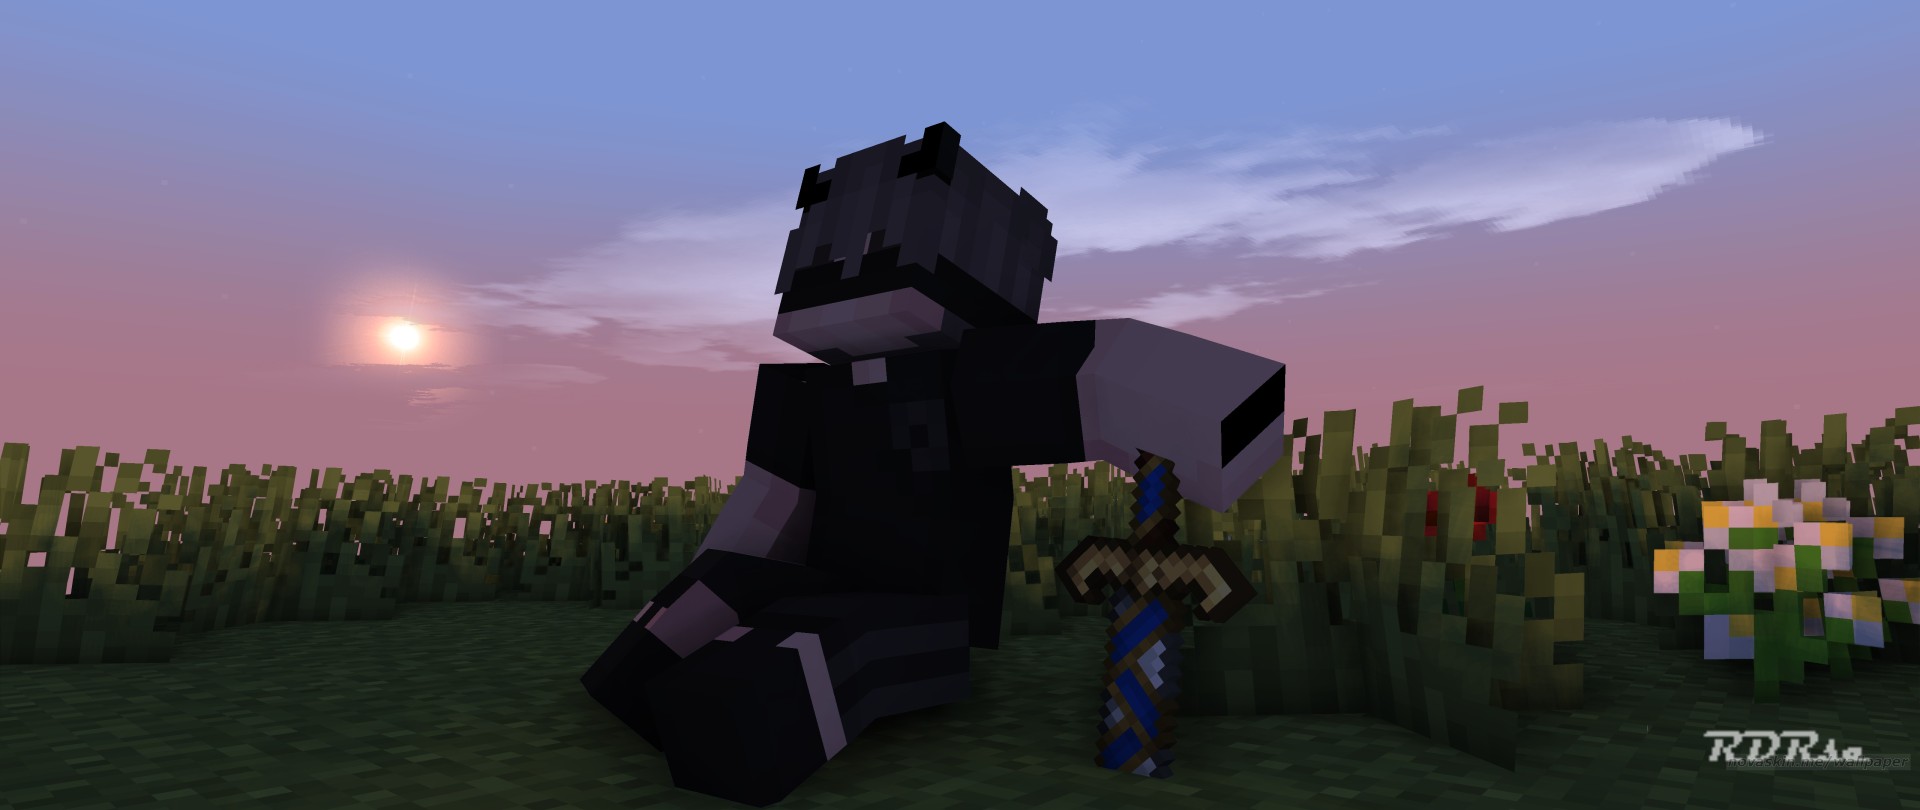 DNM_Naruto's Profile Picture on PvPRP